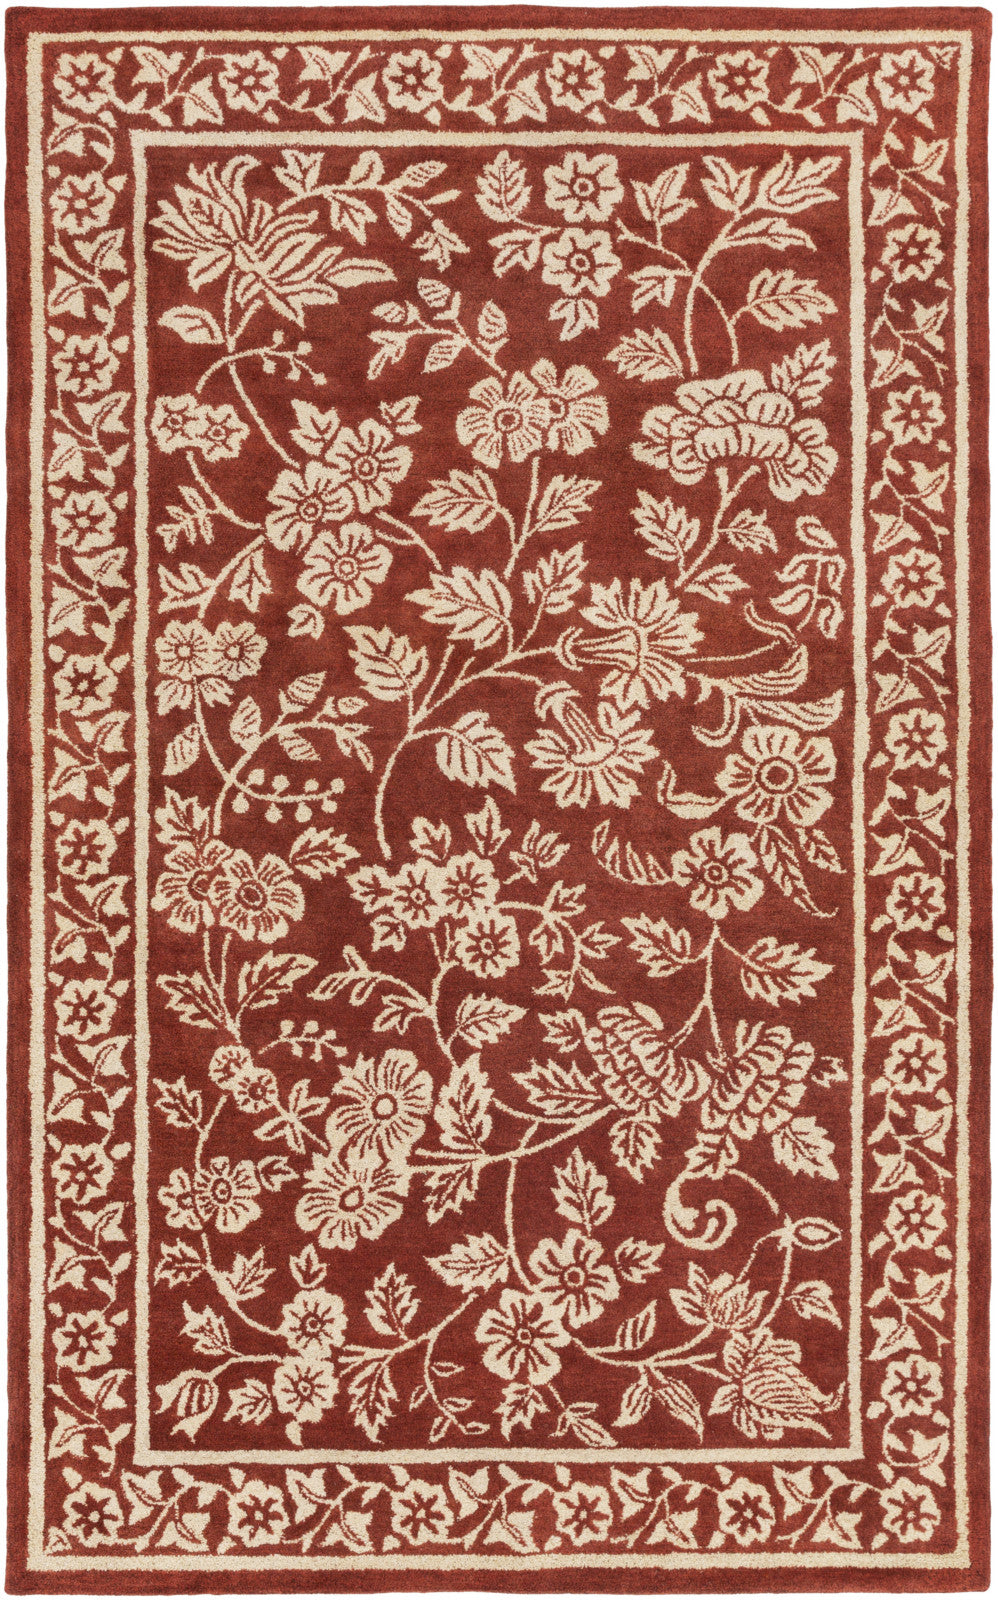 Surya SMI-2163 Red Hand Tufted Area Rug by Smithsonian